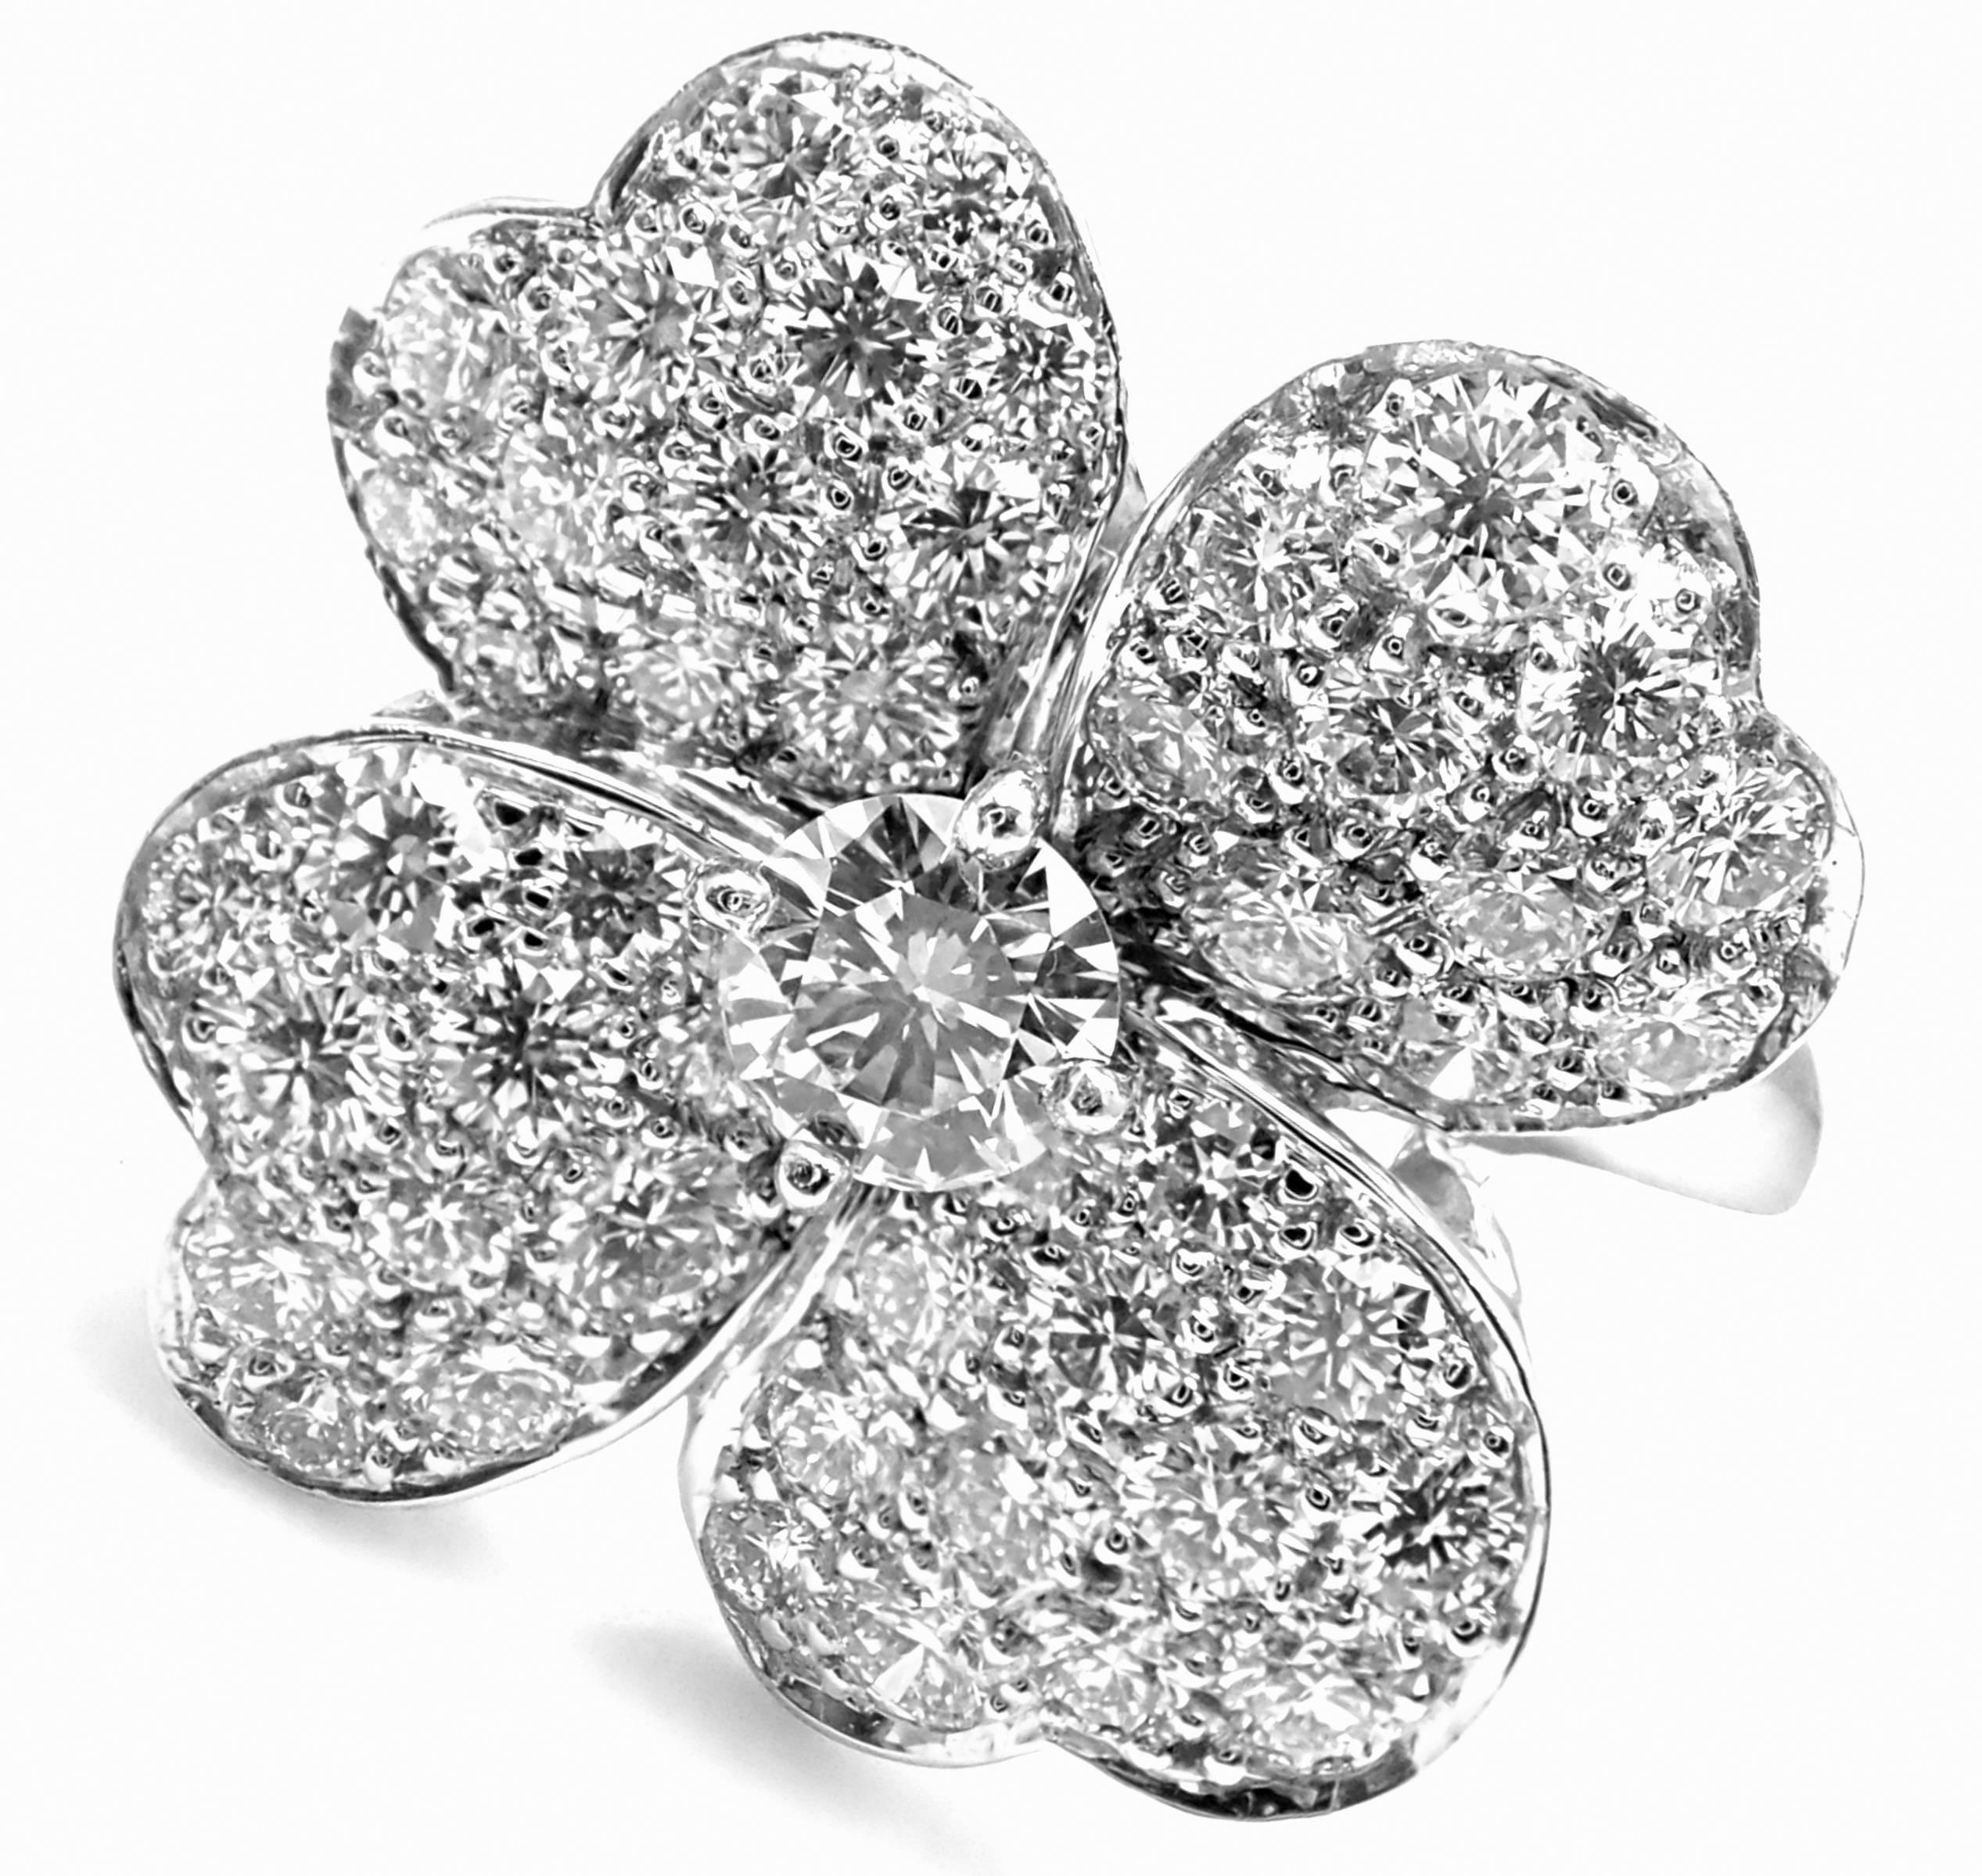 18k White Gold Diamond Medium Model Cosmos Ring by Van Cleef & Arpels.
With 53 round brilliant cut diamond VVS1 clarity, F color total weight 1.57ct
This rThis ring comes with Van Cleef & Arpels certificate and a box.
Details:
Size: European 54, US